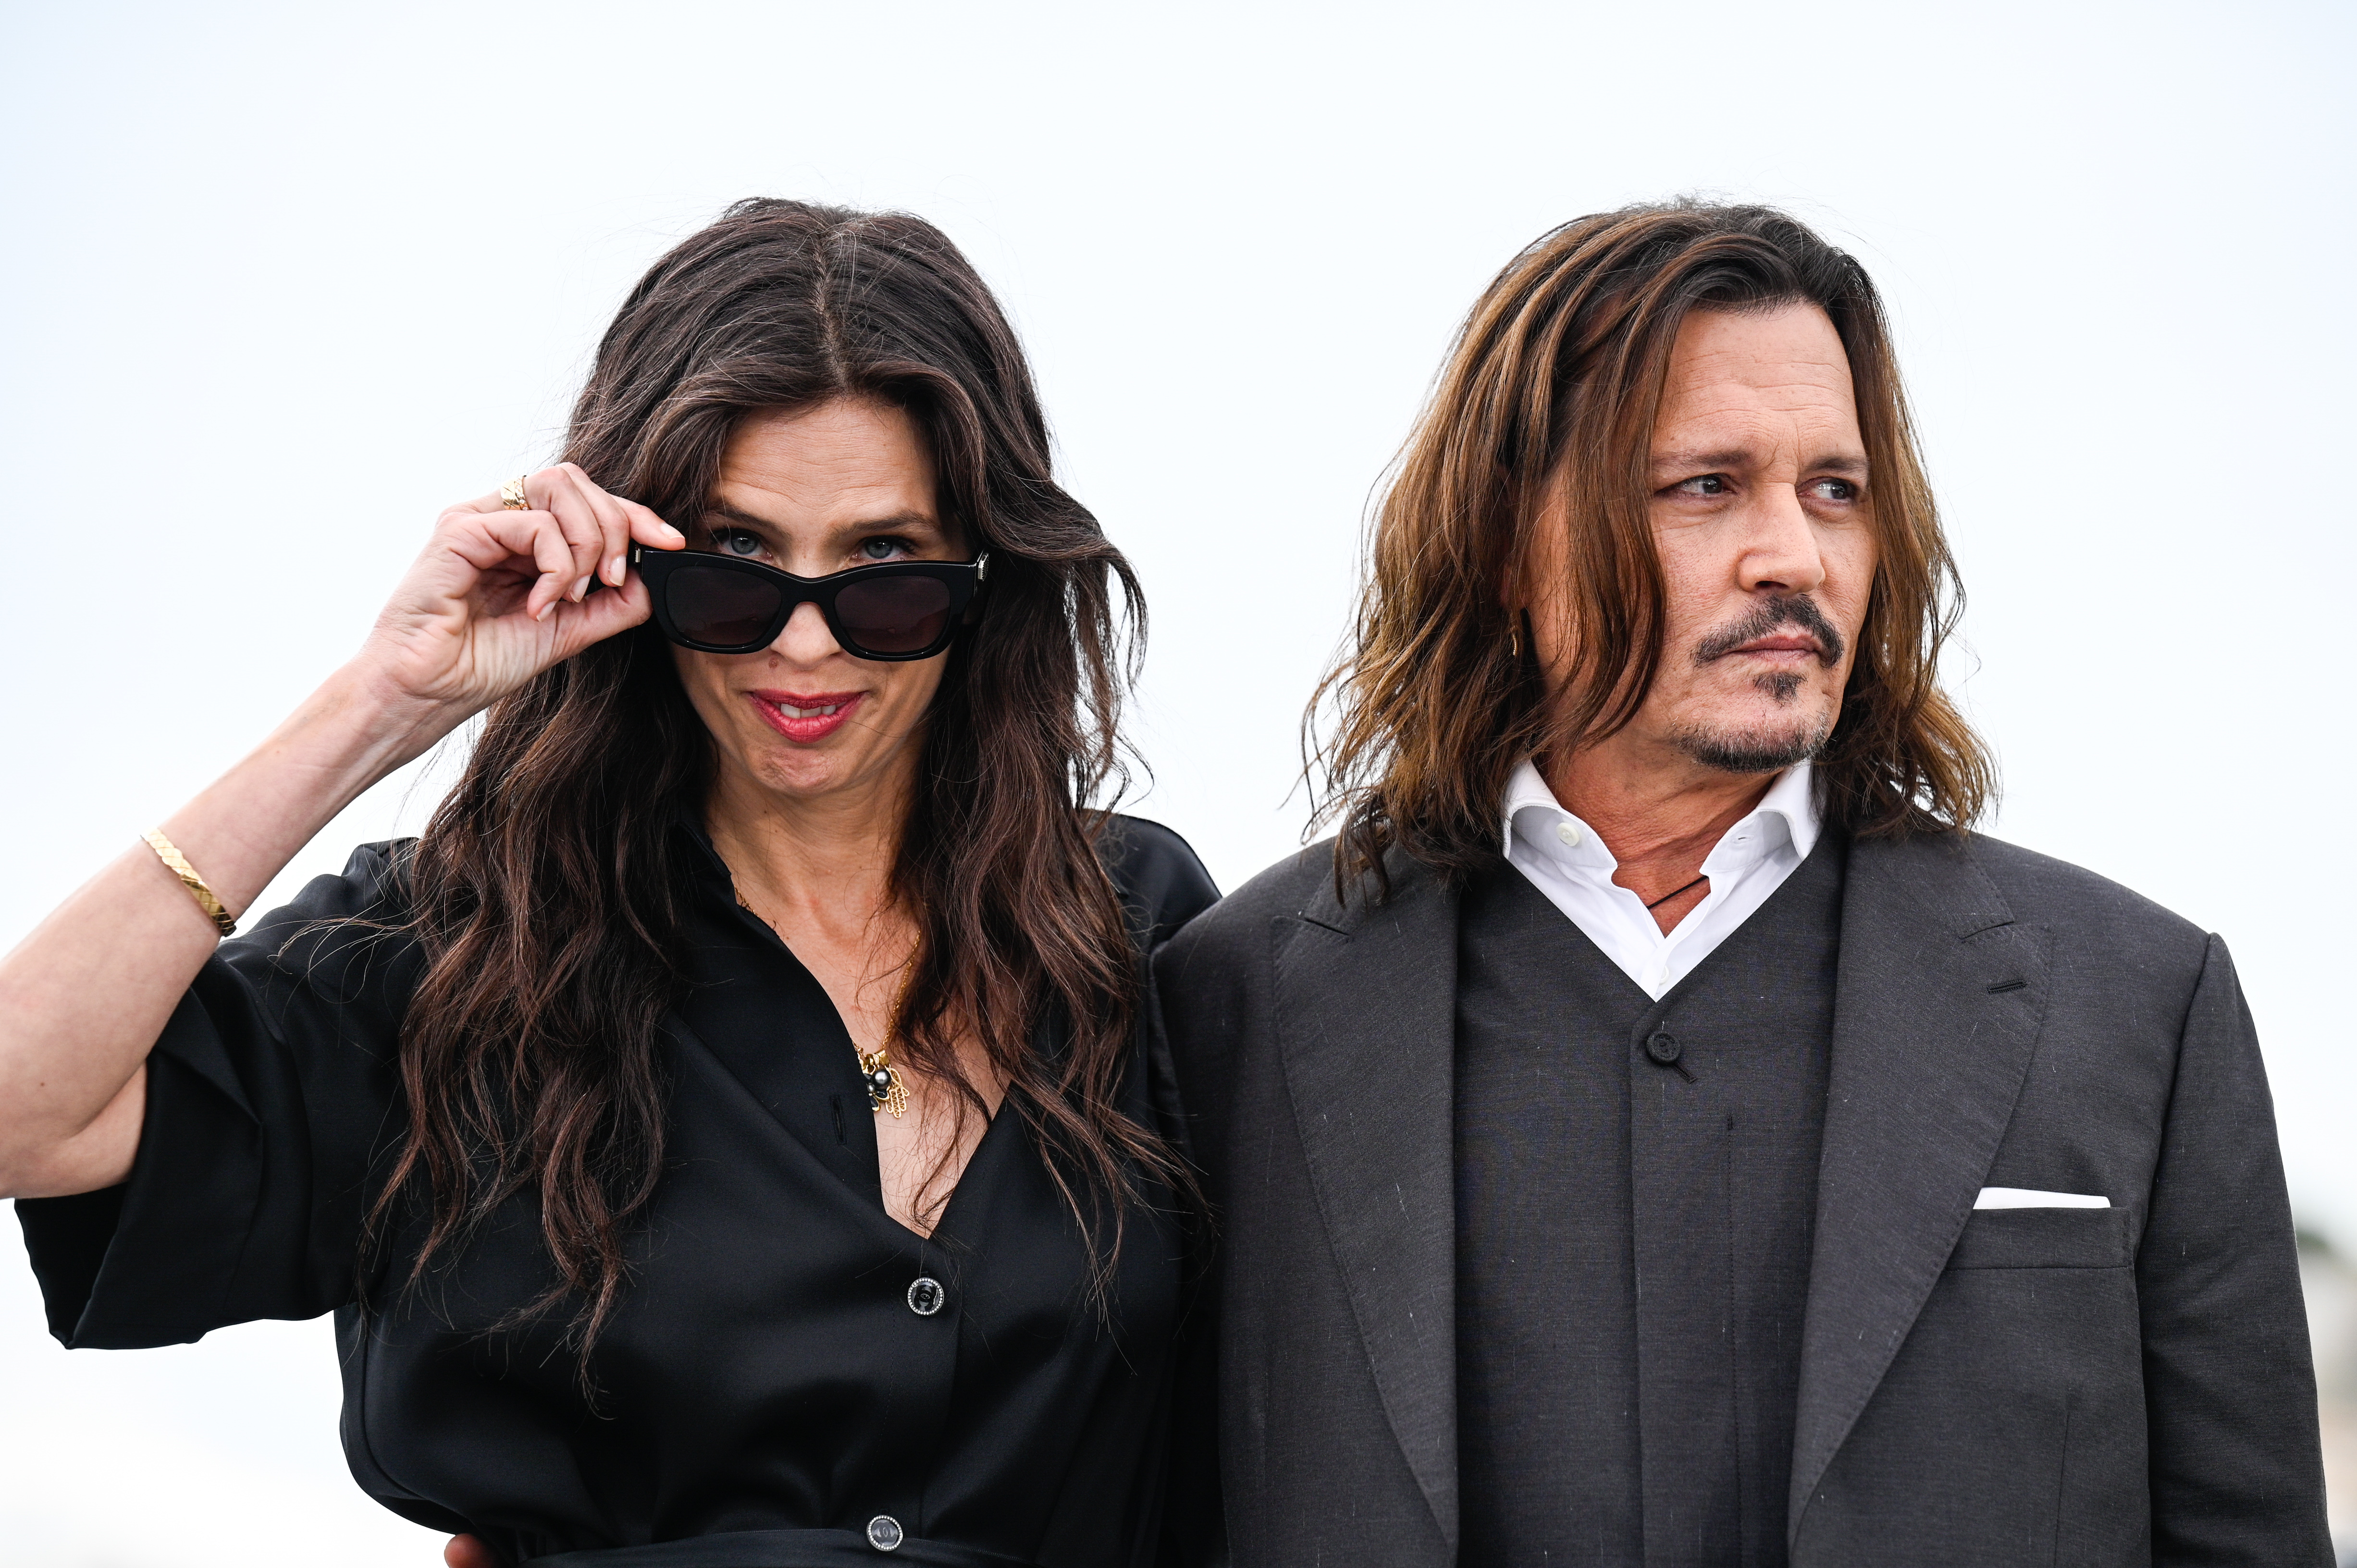 Maïwenn and Johnny Depp attends the "Jeanne du Barry" photocall at the 76th annual Cannes film festival at Palais des Festivals on May 17, 2023, in Cannes, France. | Source: Getty Images